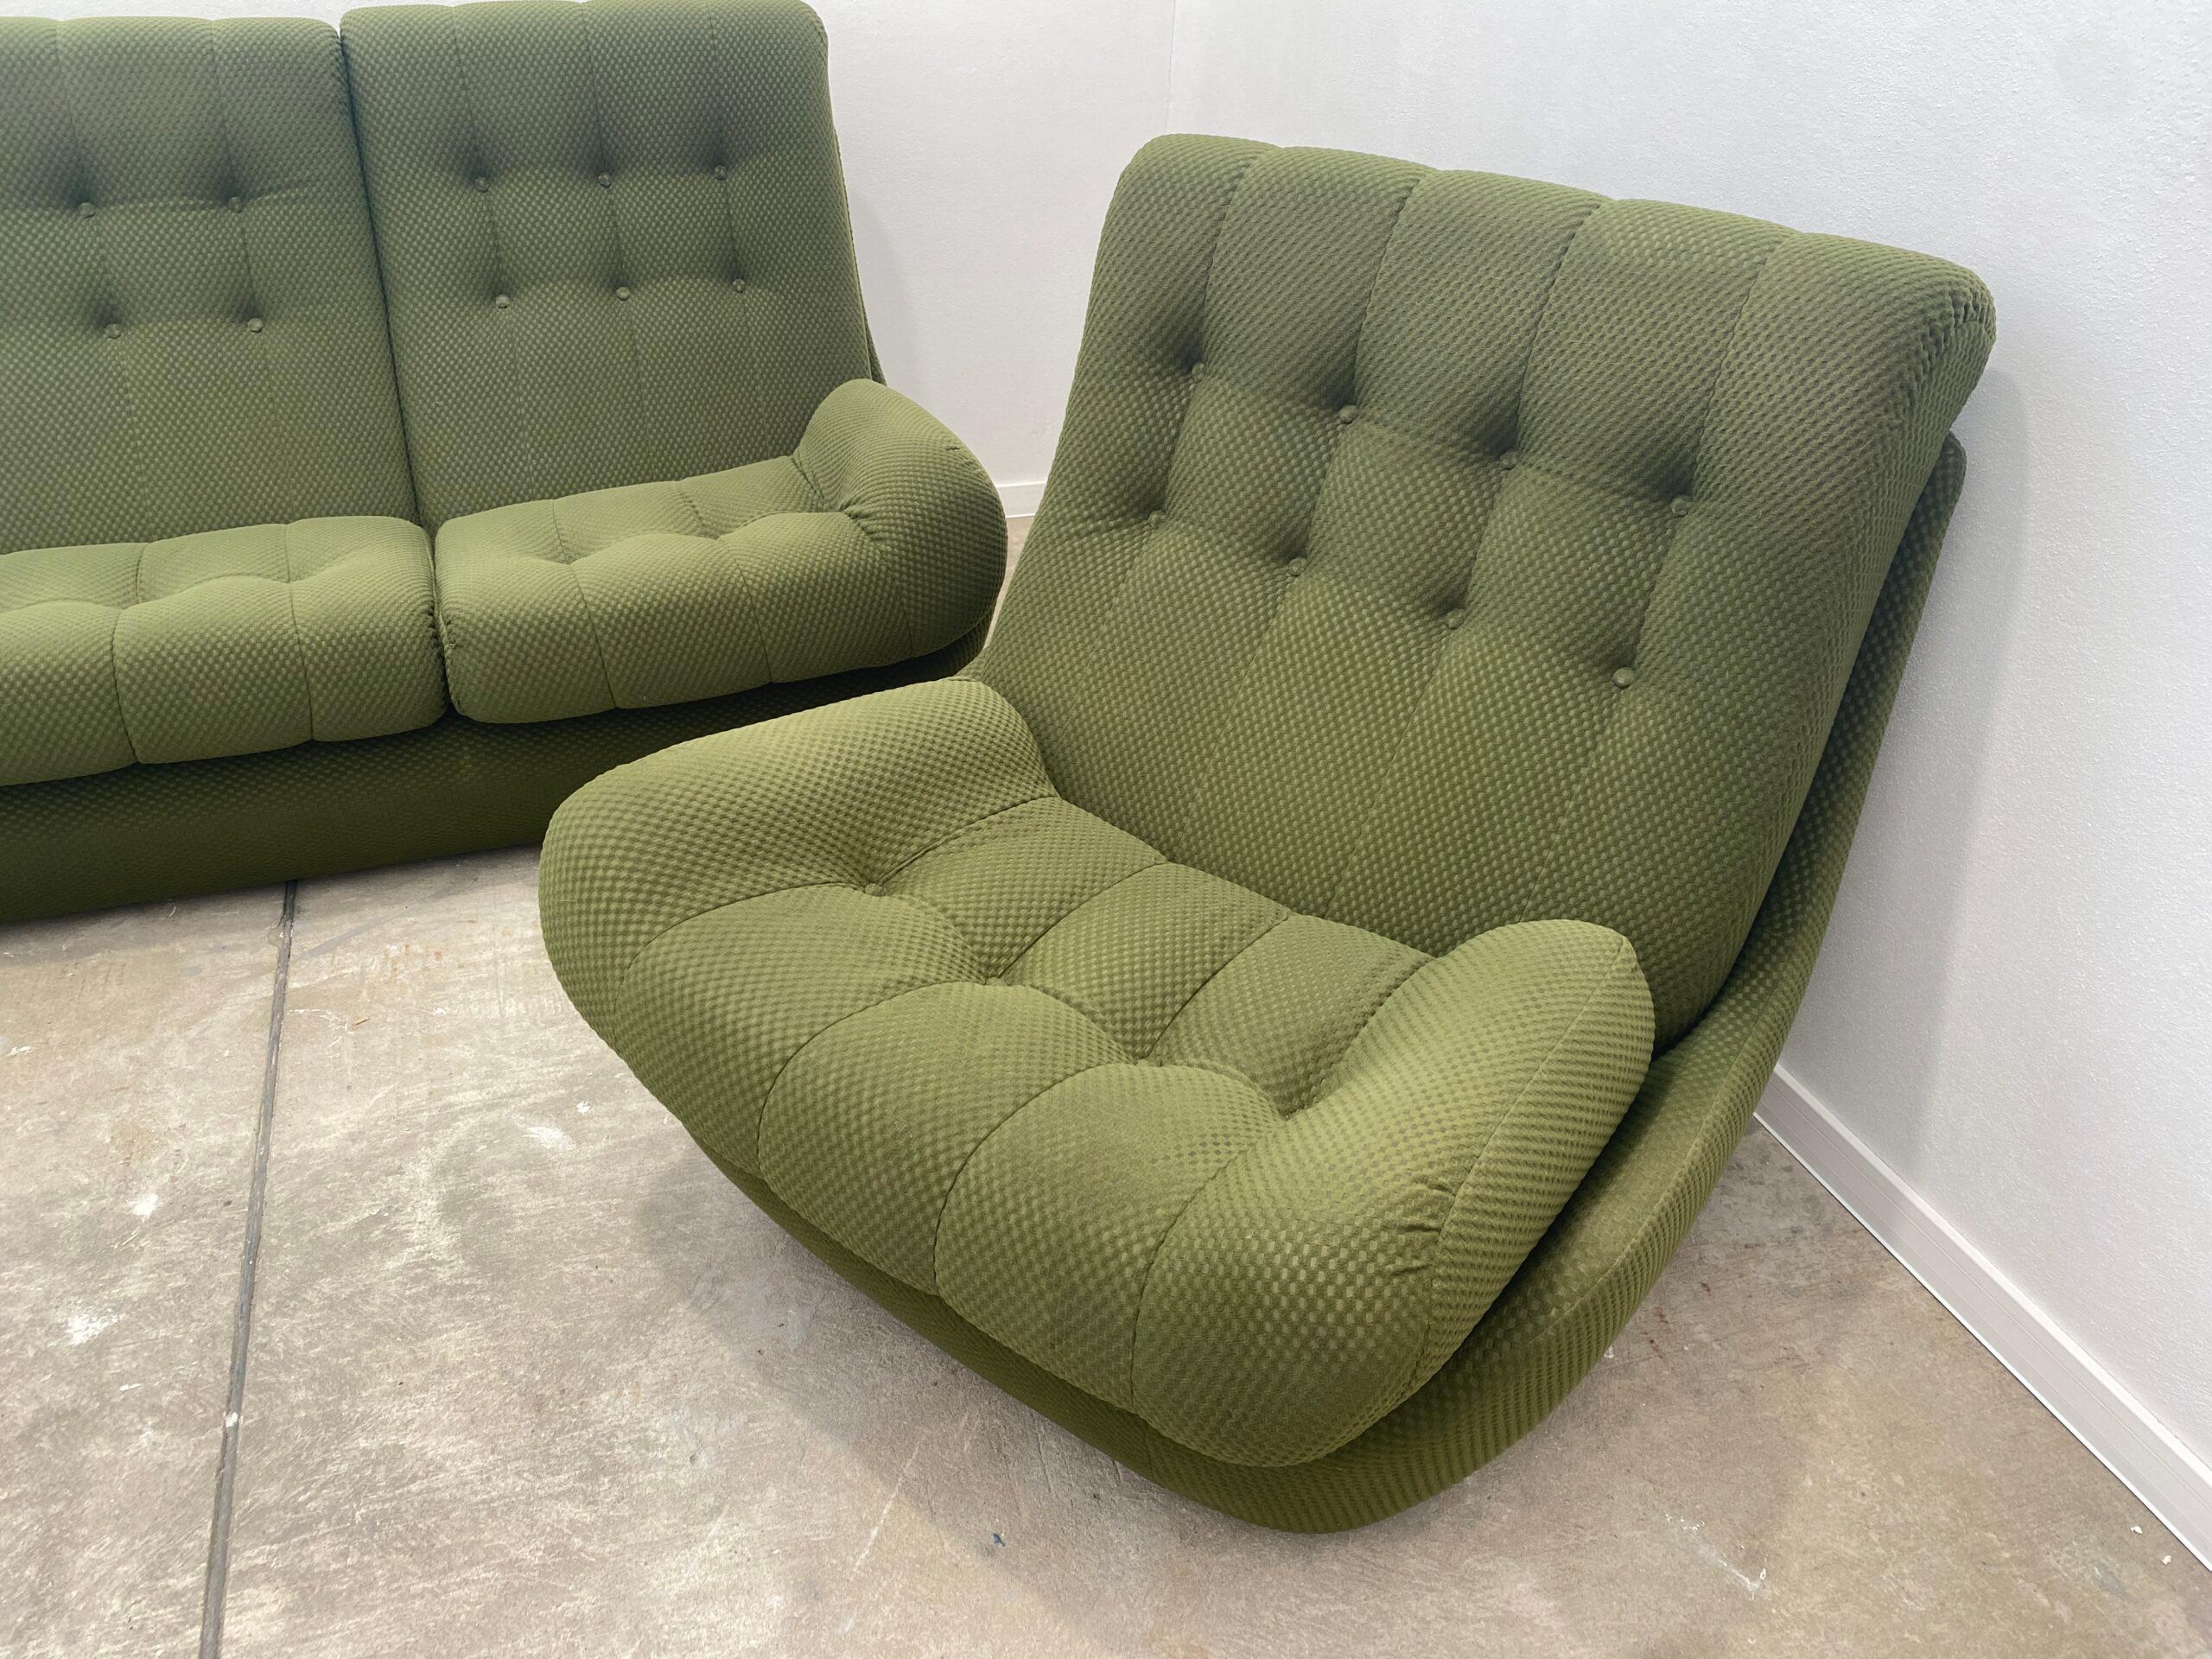 This  vintage living room set is a typical example of furniture design of the 1970/1980´s in the former Czechoslovakia. It was made by JITONA company in the 1970´s.

This living set was one of the most sought after in Czechoslovakia and was one of